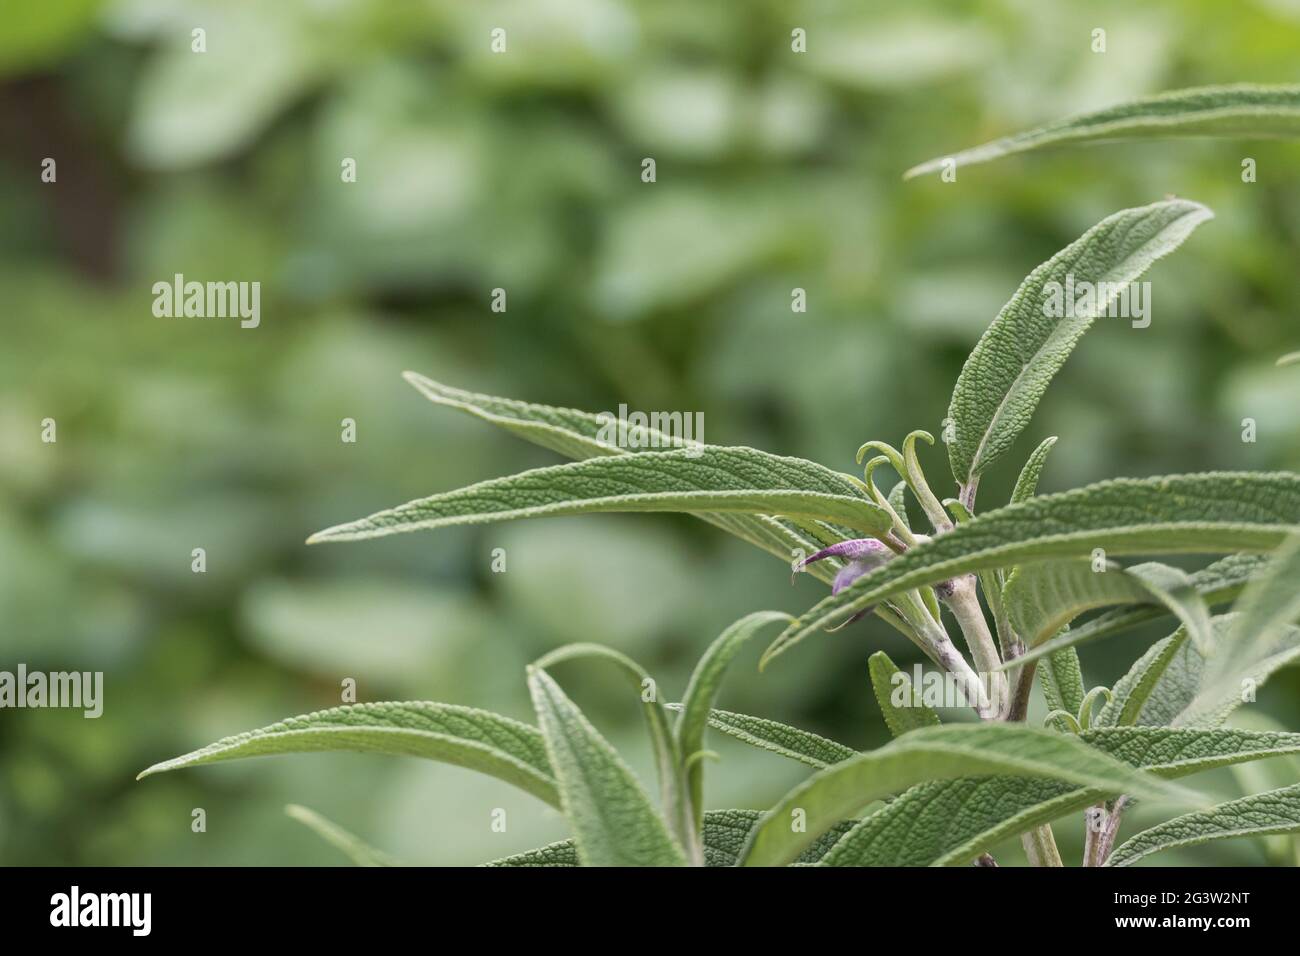 close up view of Salvia leucantha plant leaves growing outdoors Stock Photo